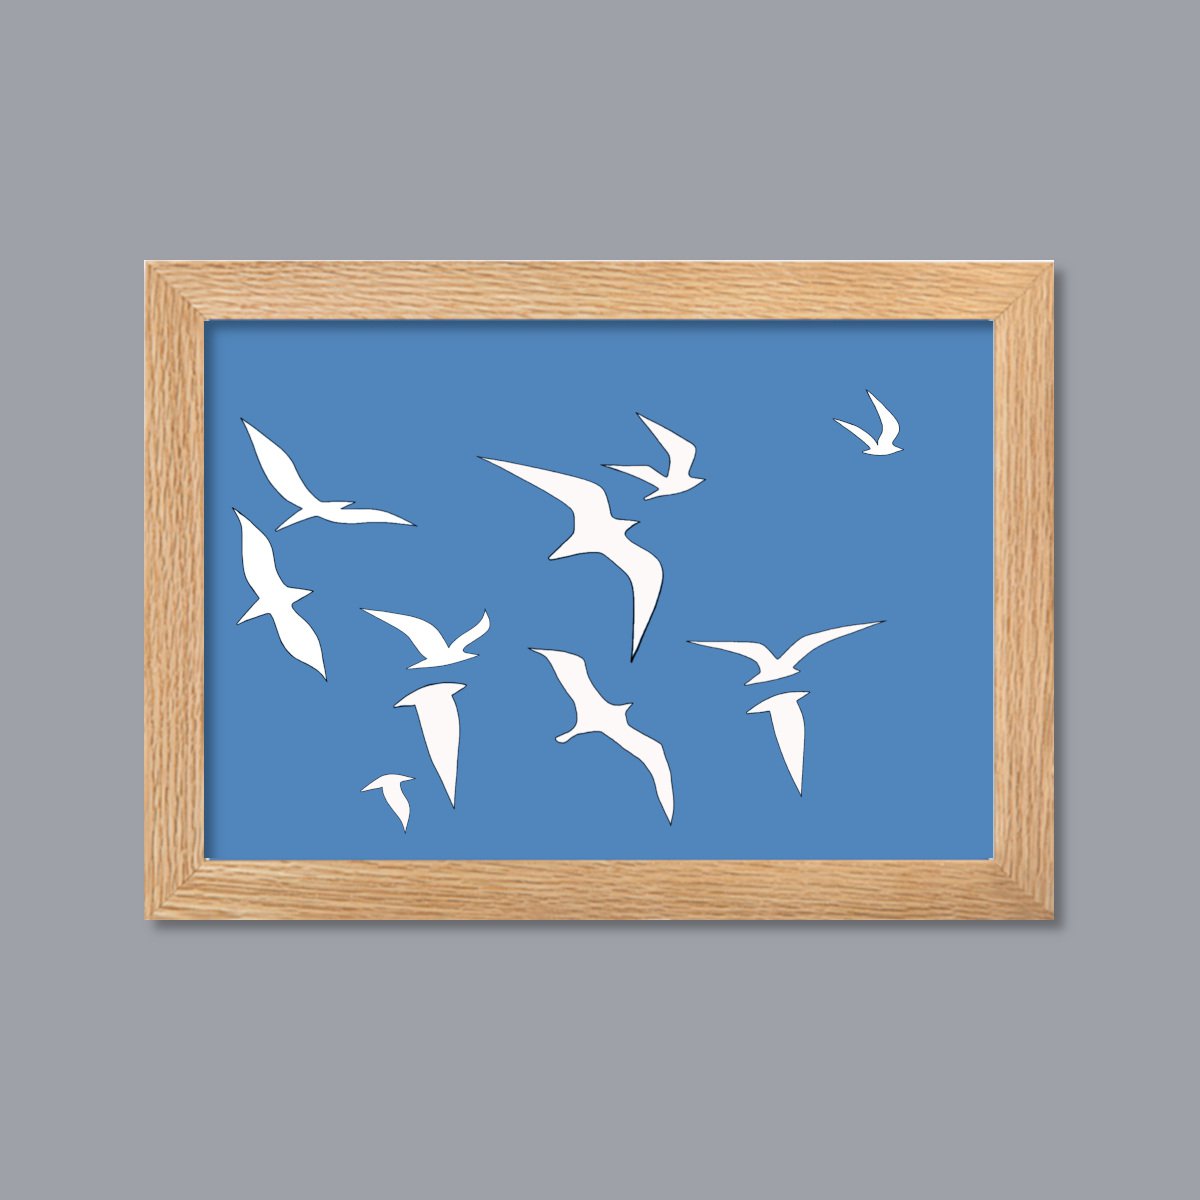 In the Sky #10 - Enhanced Matte Paper Framed Print - Ready to Hang by Marina Krylova